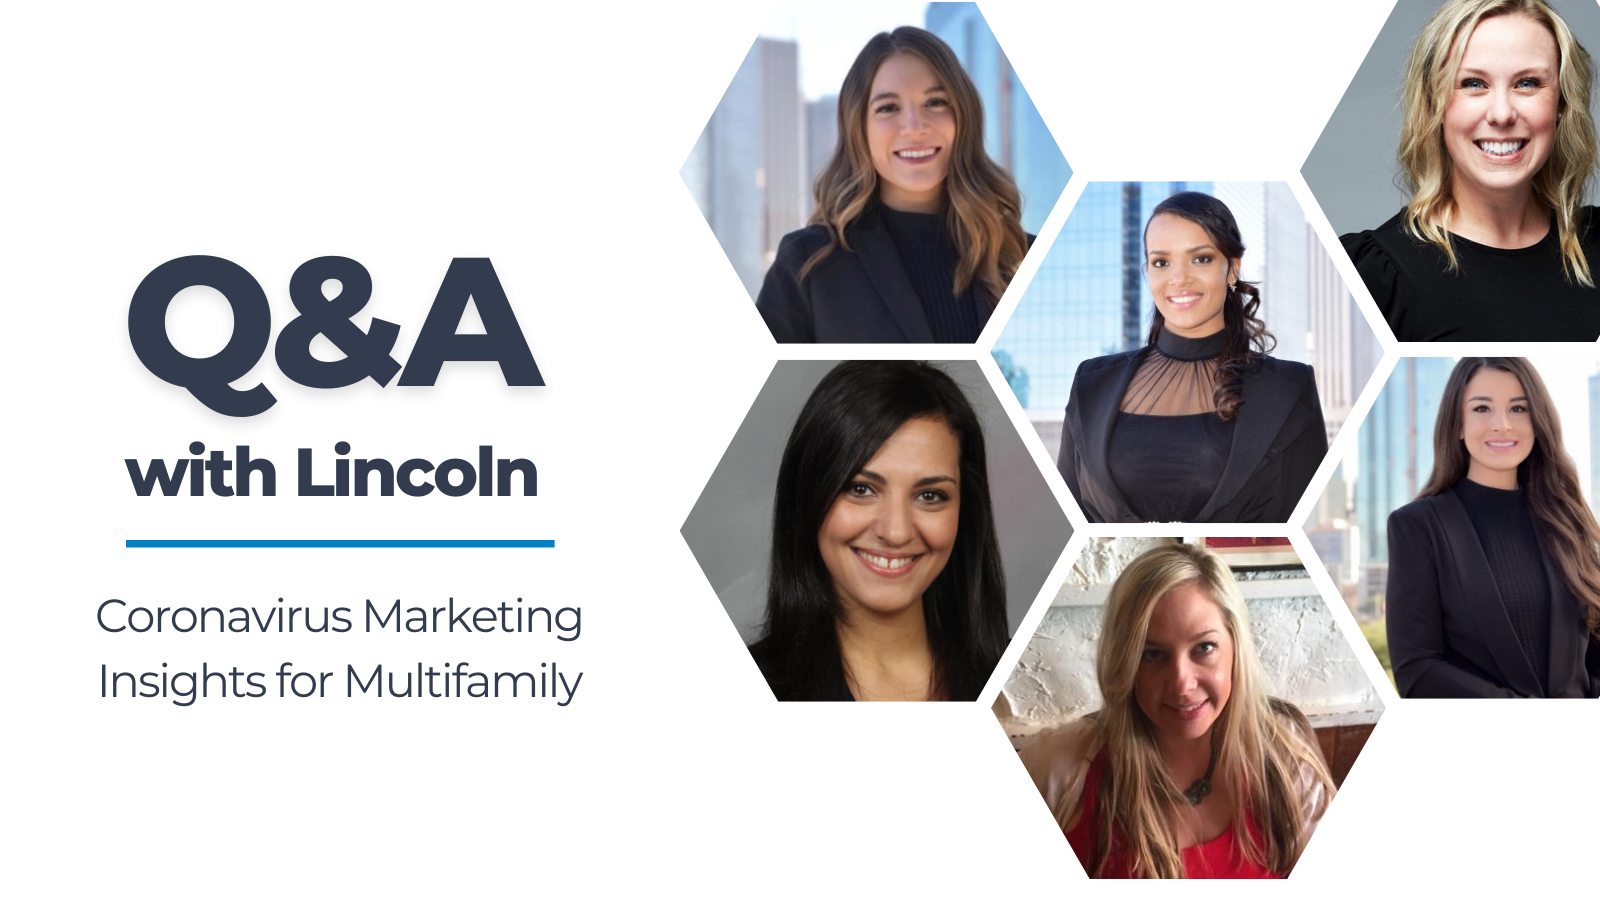 Q&A with Lincoln: COVID Marketing Insights for Multifamily